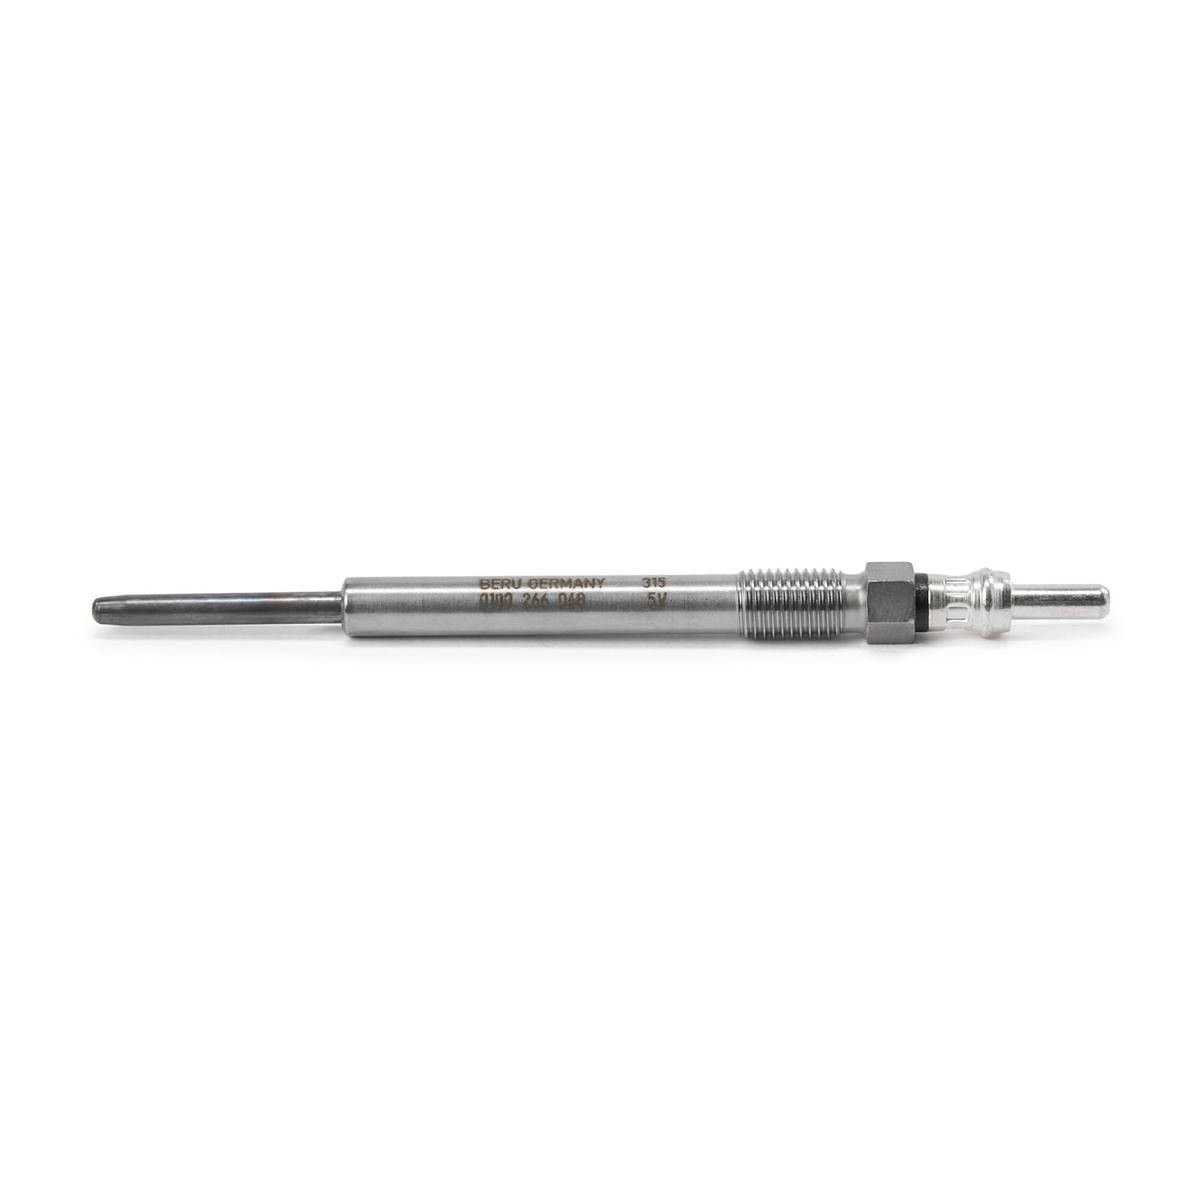 0 100 266 068 BERU 5V 30A M8x1,0, after-glow capable, Pencil-type Glow Plug, Length: 112 mm, 20 Nm, 8 Nm, 123, ISS Thread Size: M8x1,0 Glow plugs GE121A buy